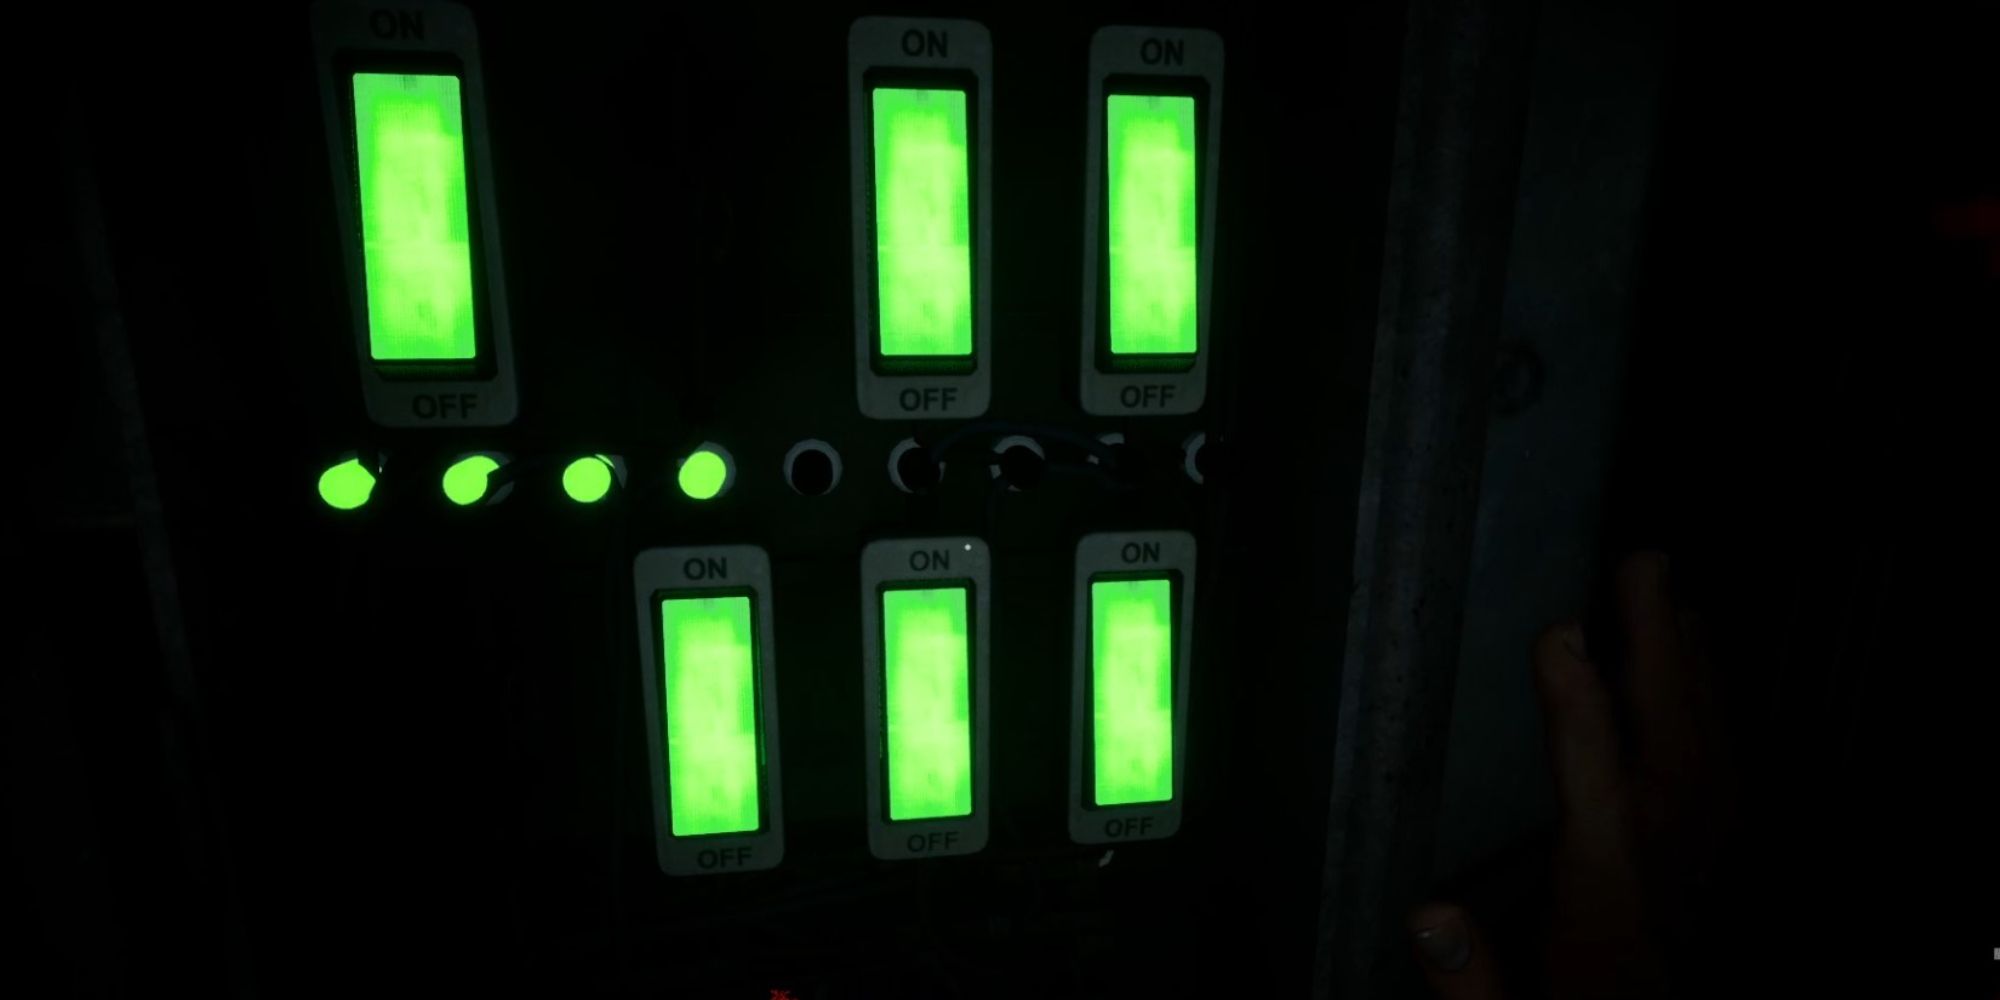 All long-lived trial generator buttons are green.